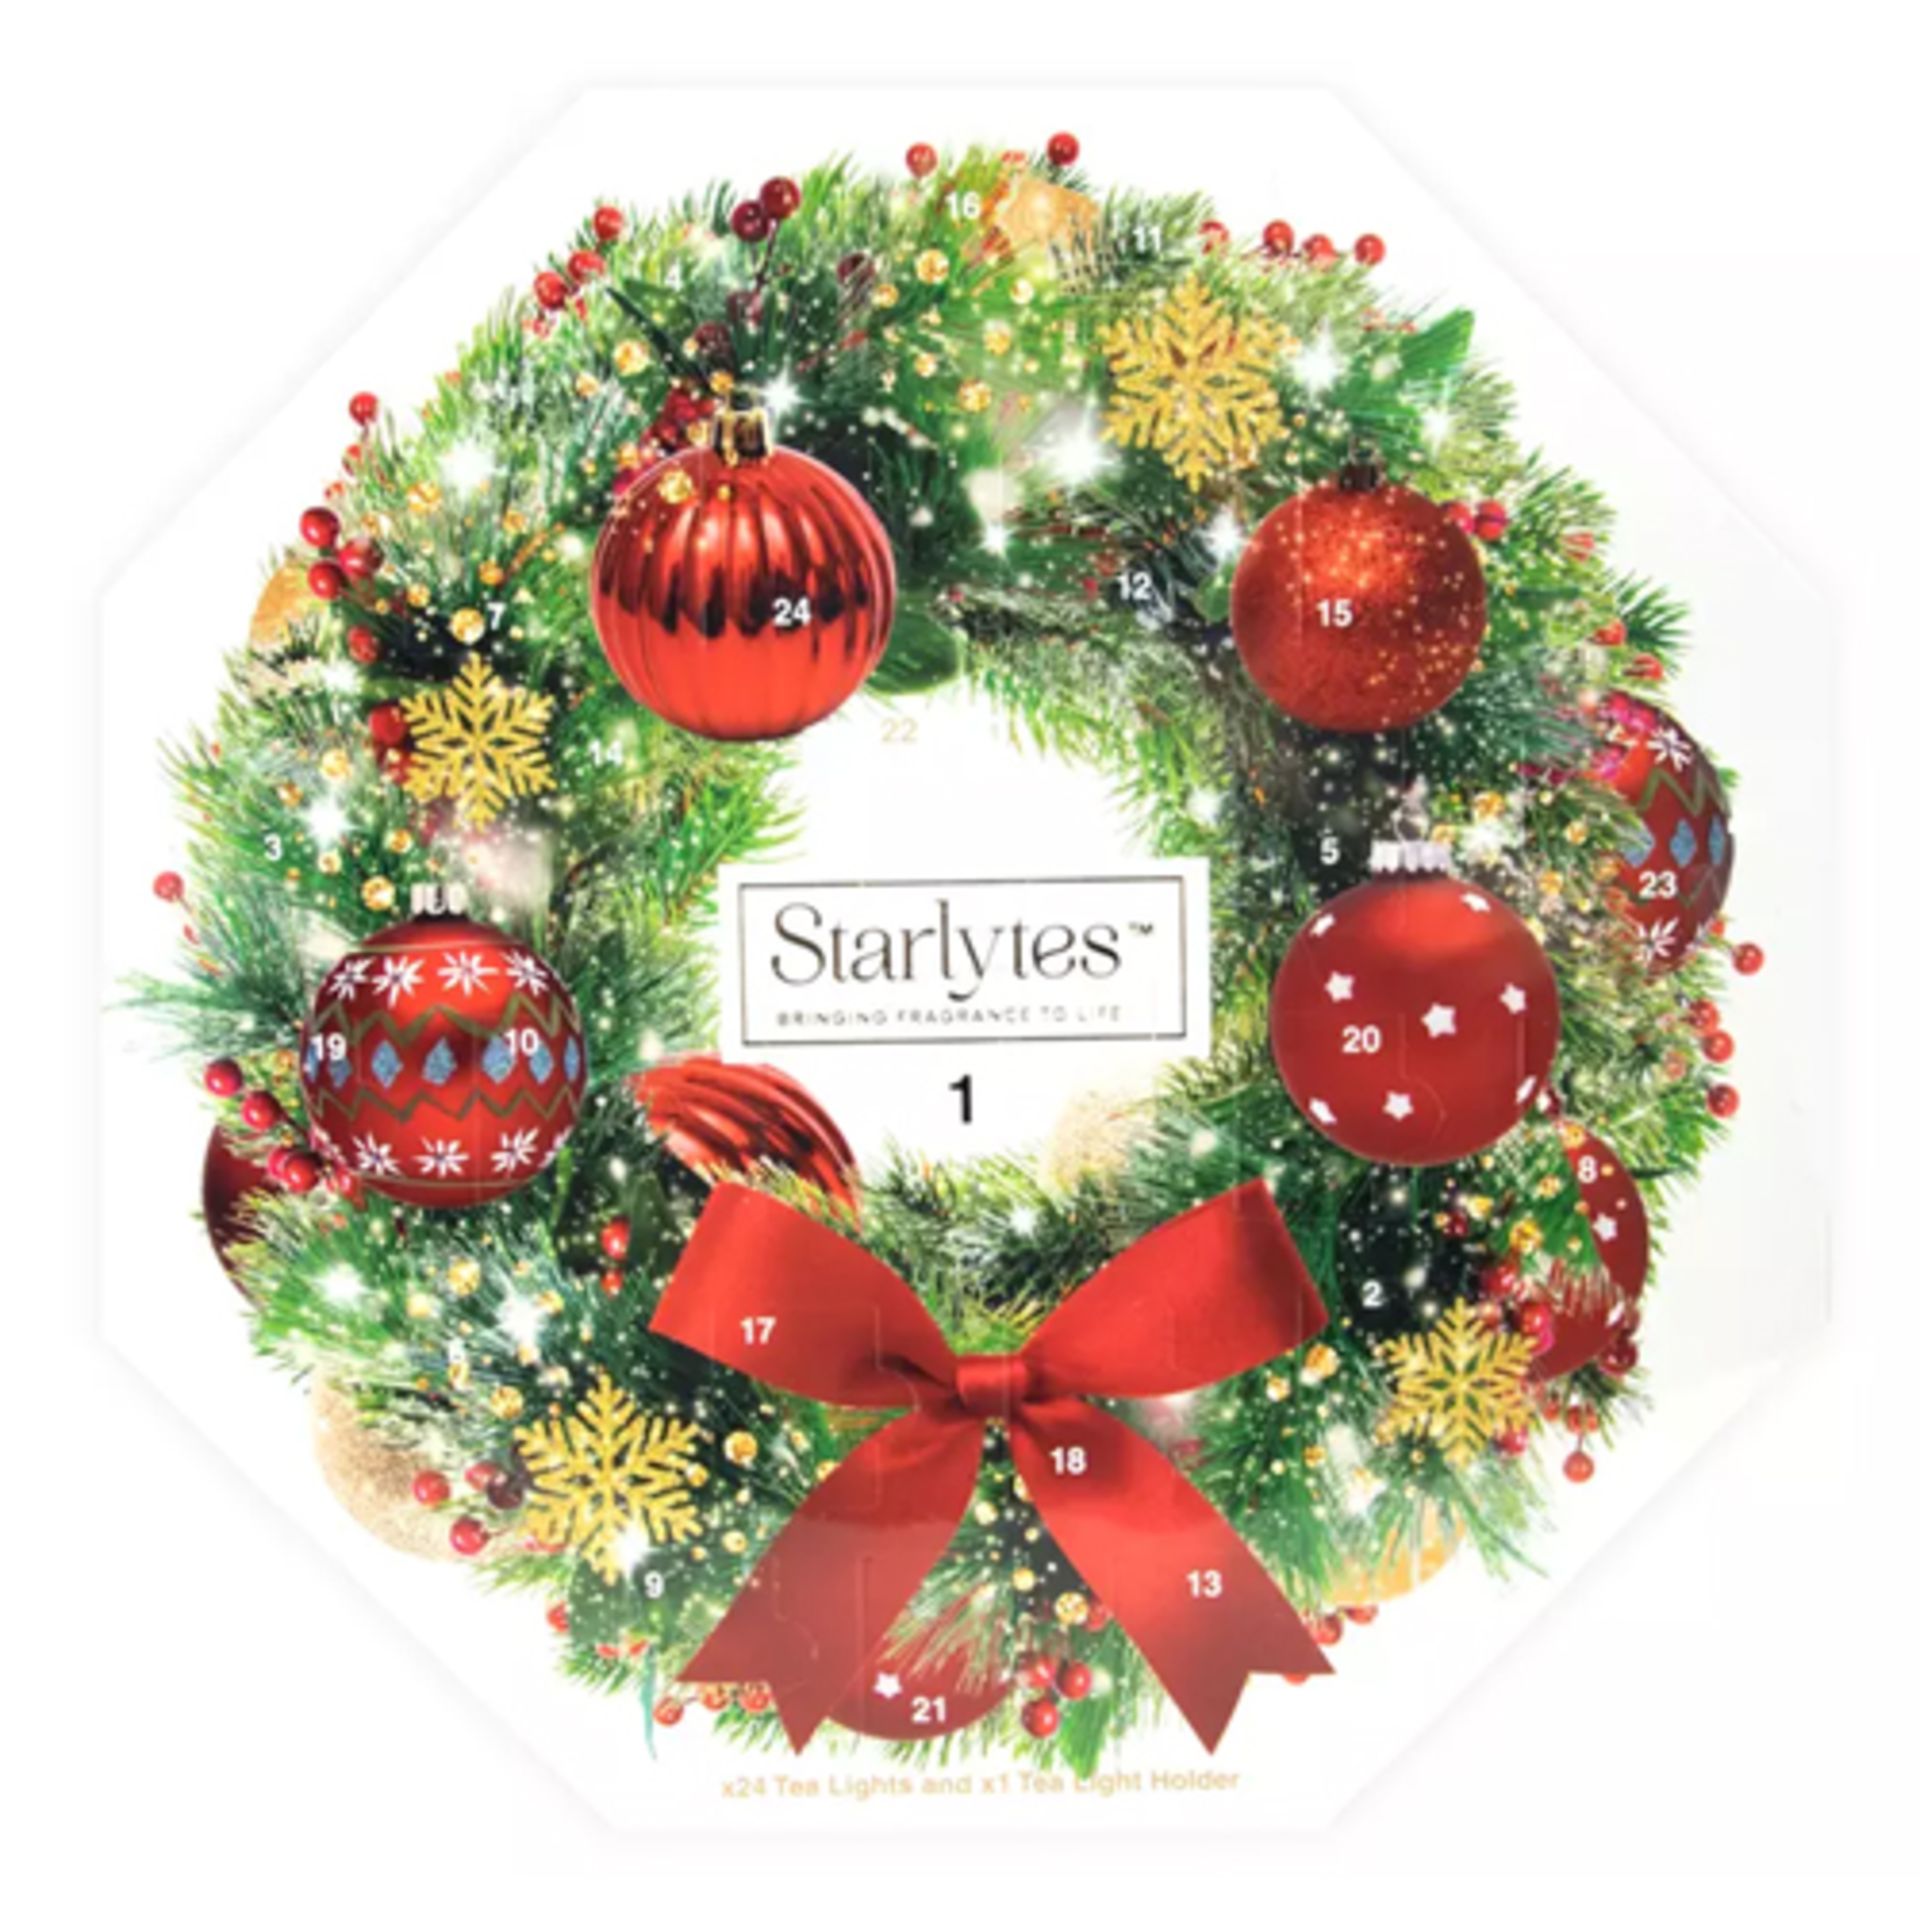 X2 BRAND NEW STARLYTES SCENTED CANDLE ADVENT CALENDER - RRP £7.99 EACH